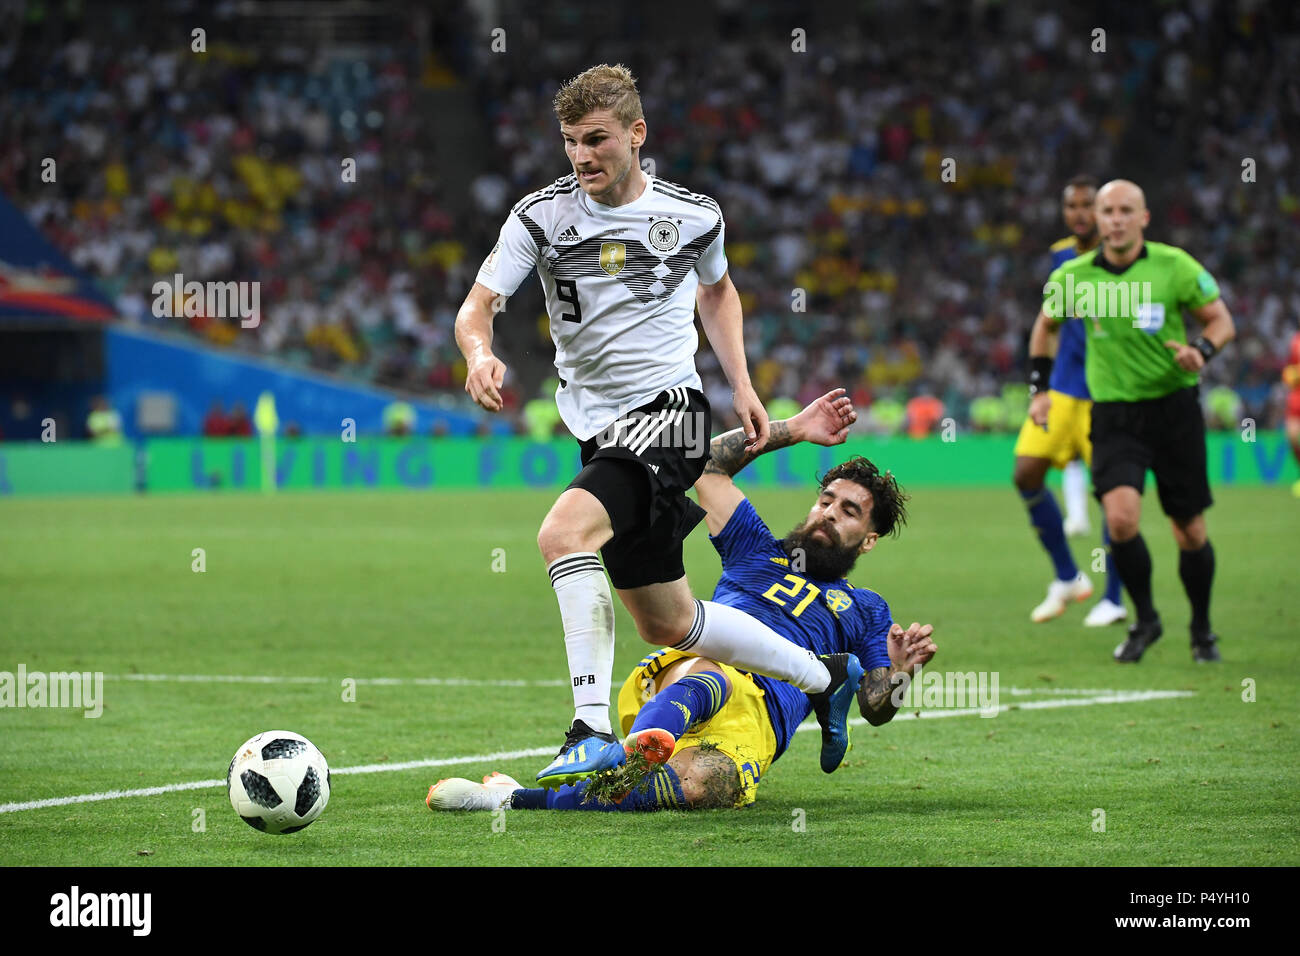 Sochi, Russia. 23rd June, 2018. Foul that led to the decisive free kick: Timo Werner (Germany) in duels with Jimmy Durmaz (Sweden). GES/Football/World Championship 2018 Russia: Germany - Sweden, 23.06.2018 GES/Soccer/Football/Worldcup 2018 Russia: Germany vs Sweden, Sochi, June 23, 2018 | usage worldwide Credit: dpa/Alamy Live News Stock Photo